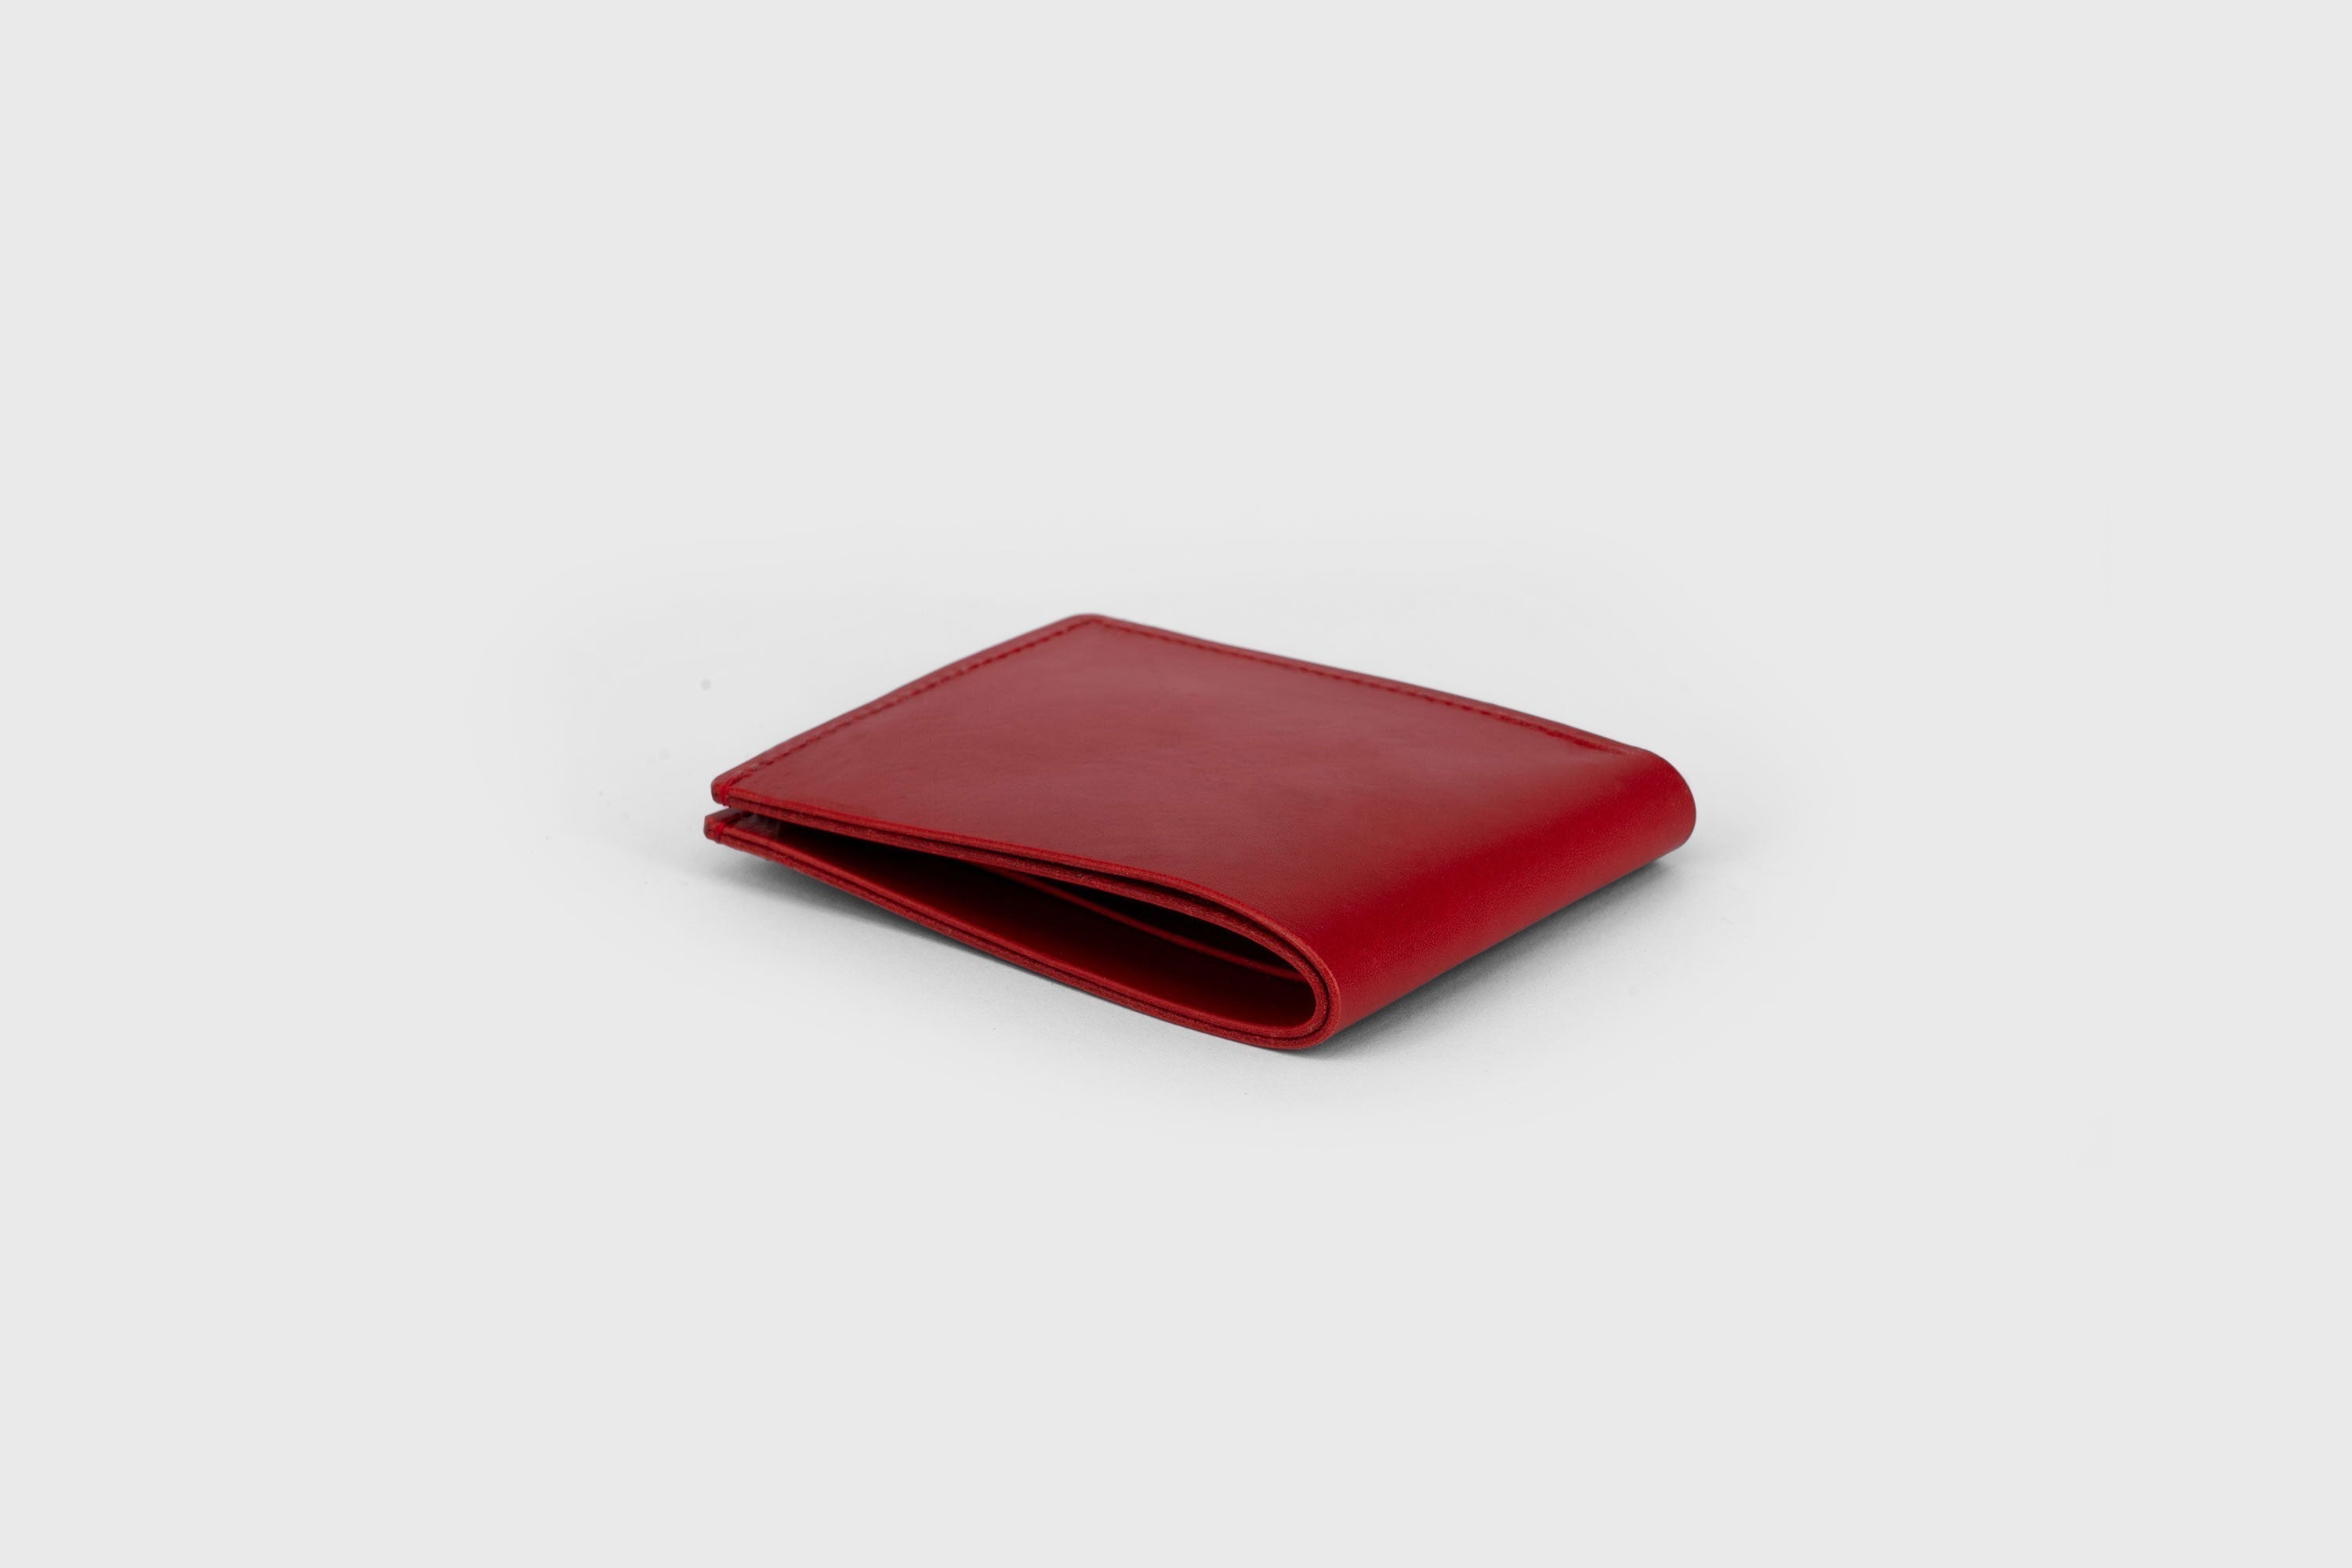 Bifold Wallet Red Leather Vegetable Tanned Leather Premium Classic Design and Handcrafted By Atelier Madre Manuel Dreeesmann Barcelona Spain